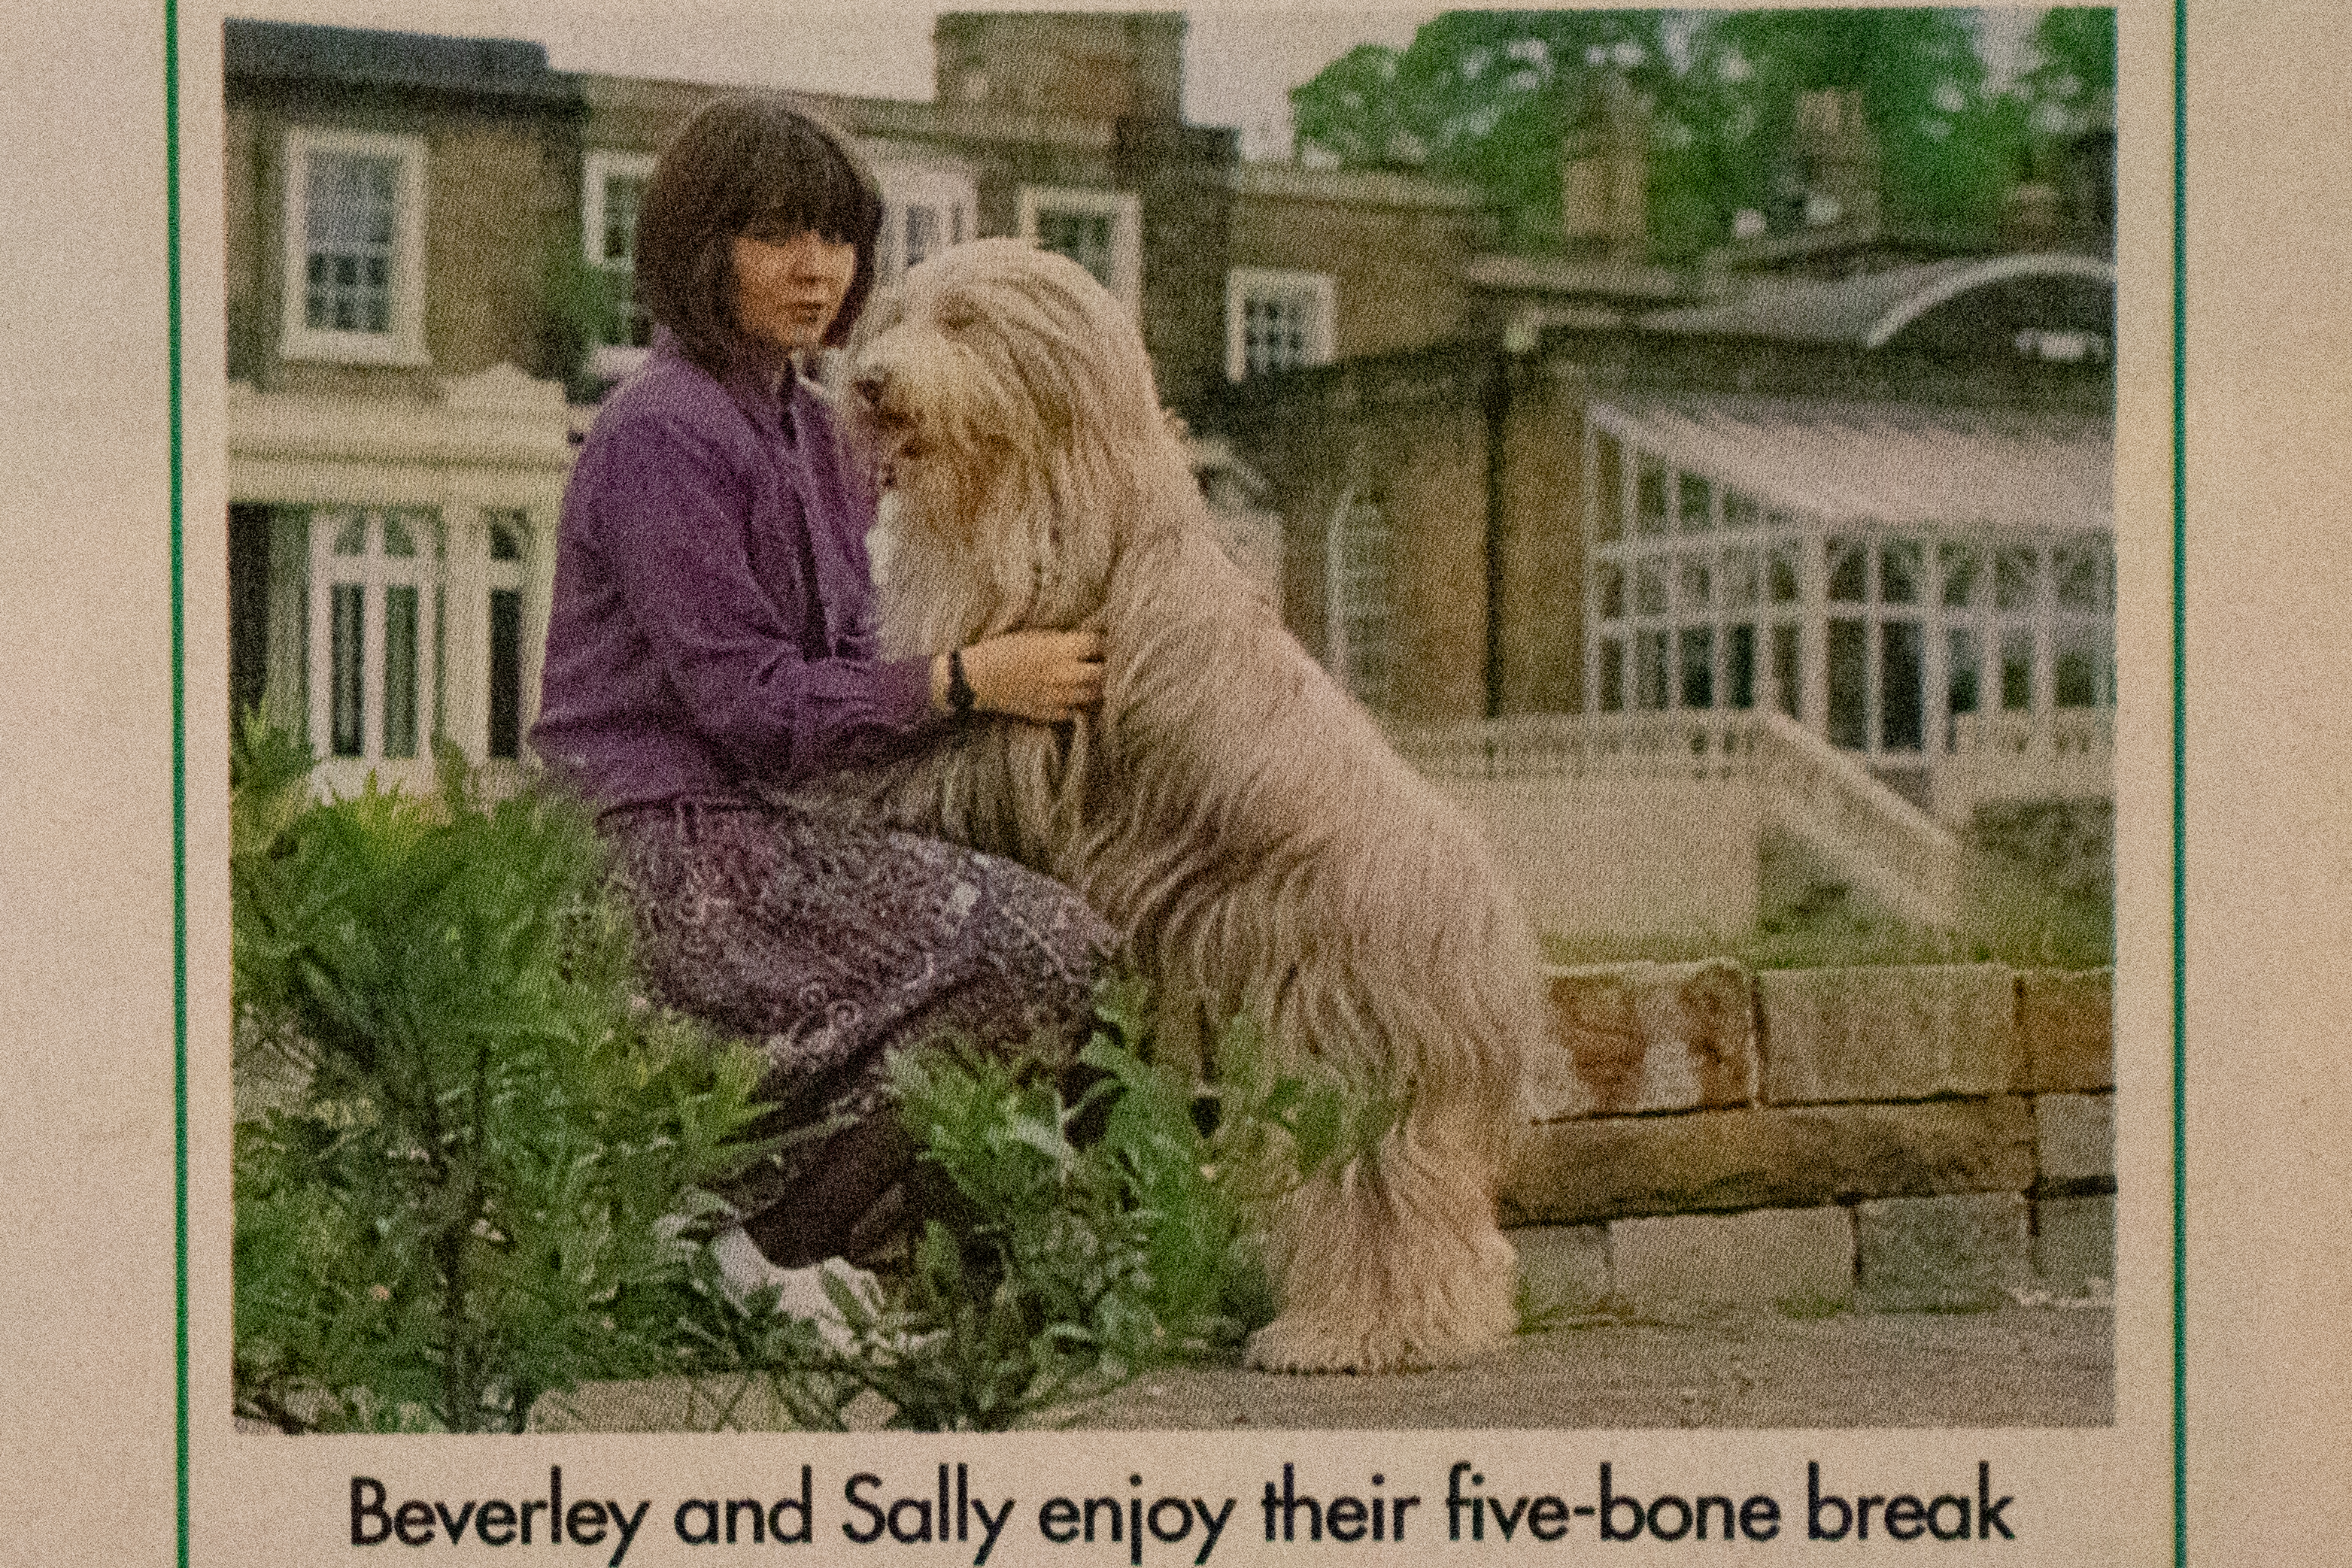 Beverley and Sally